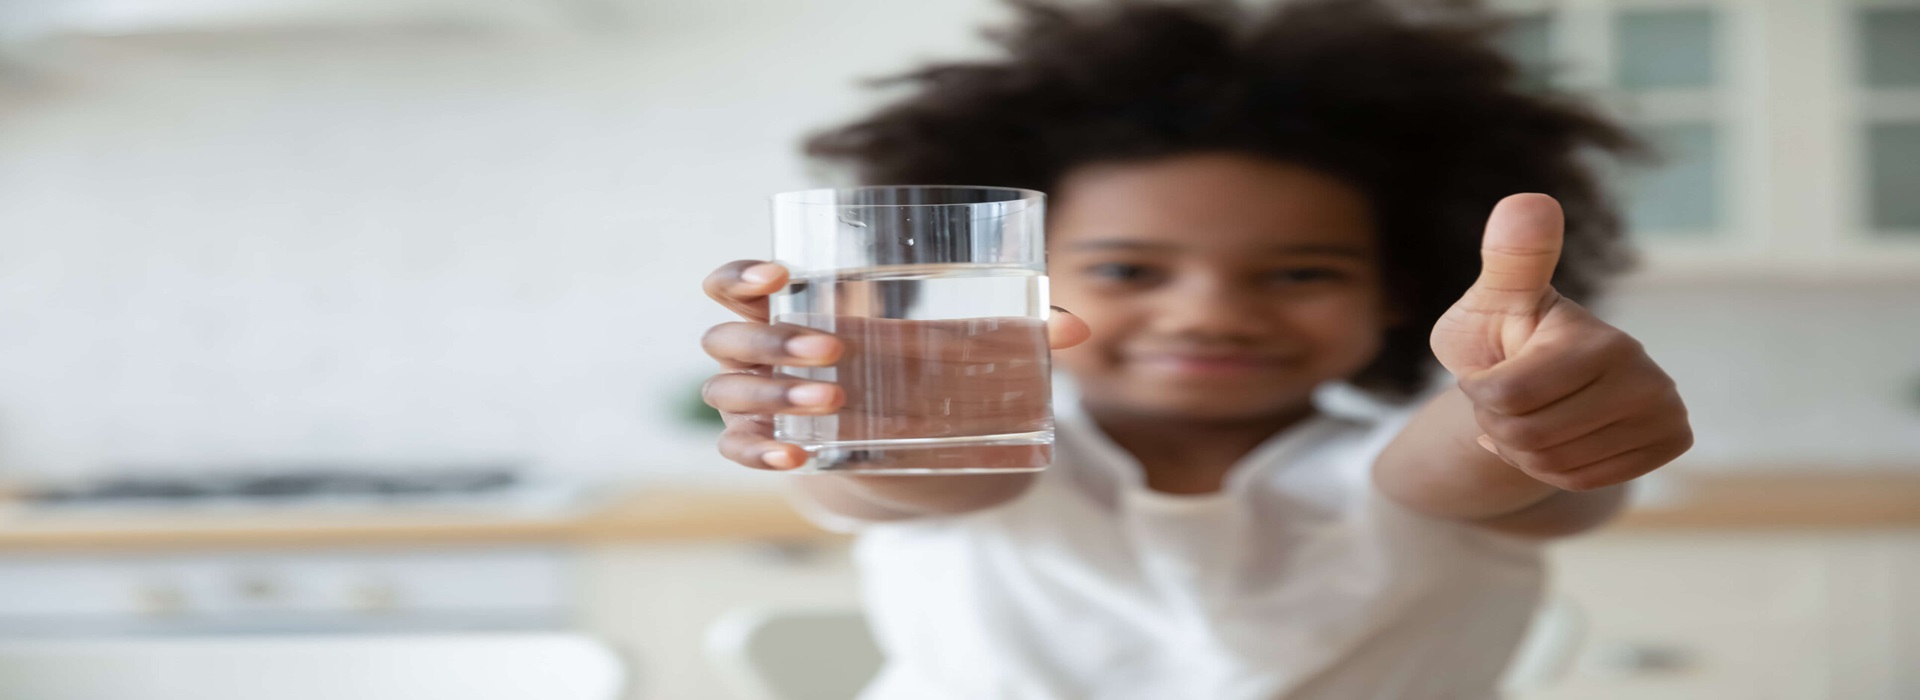 A child holding a glass of water, showcasing the benefits of water softener systems.